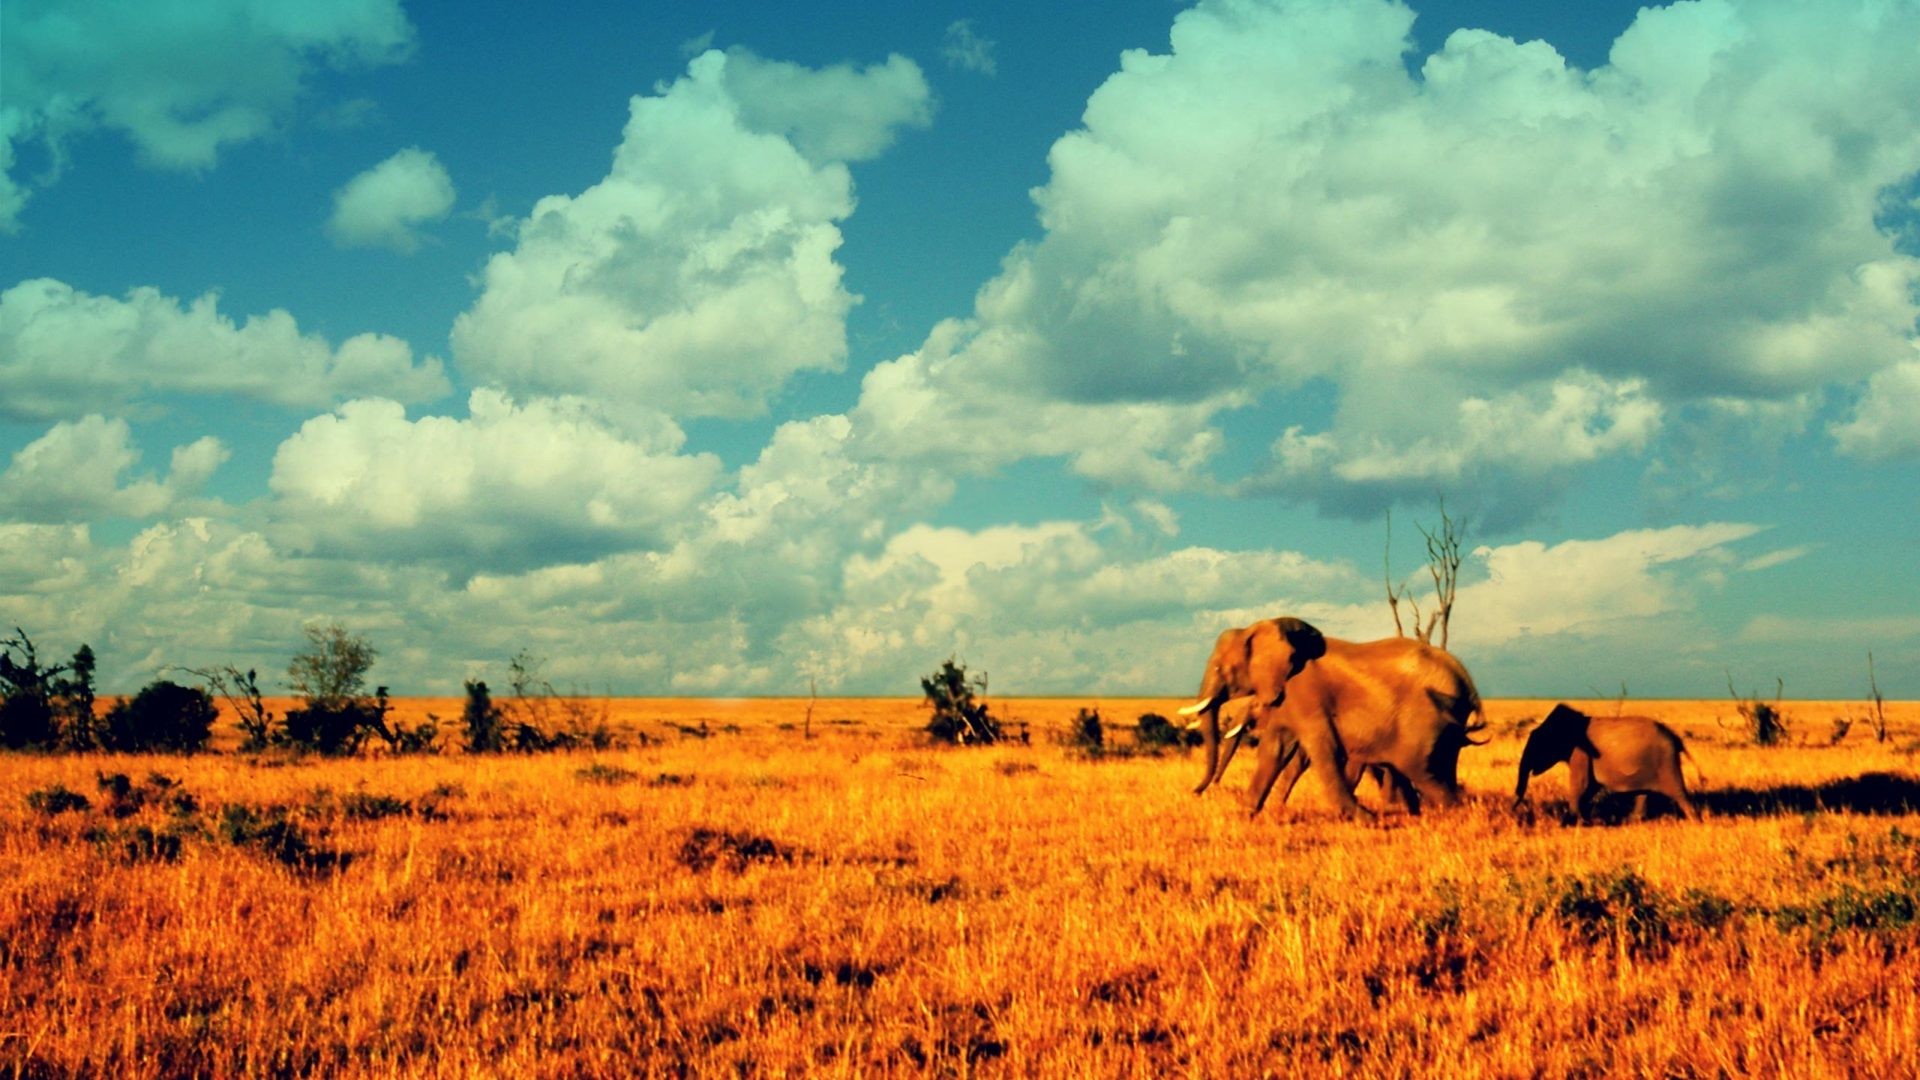 1920x1080 Elephants Tag - Deserts Baby Animals Elephants Elephant African Nature  Images Best for HD 16: